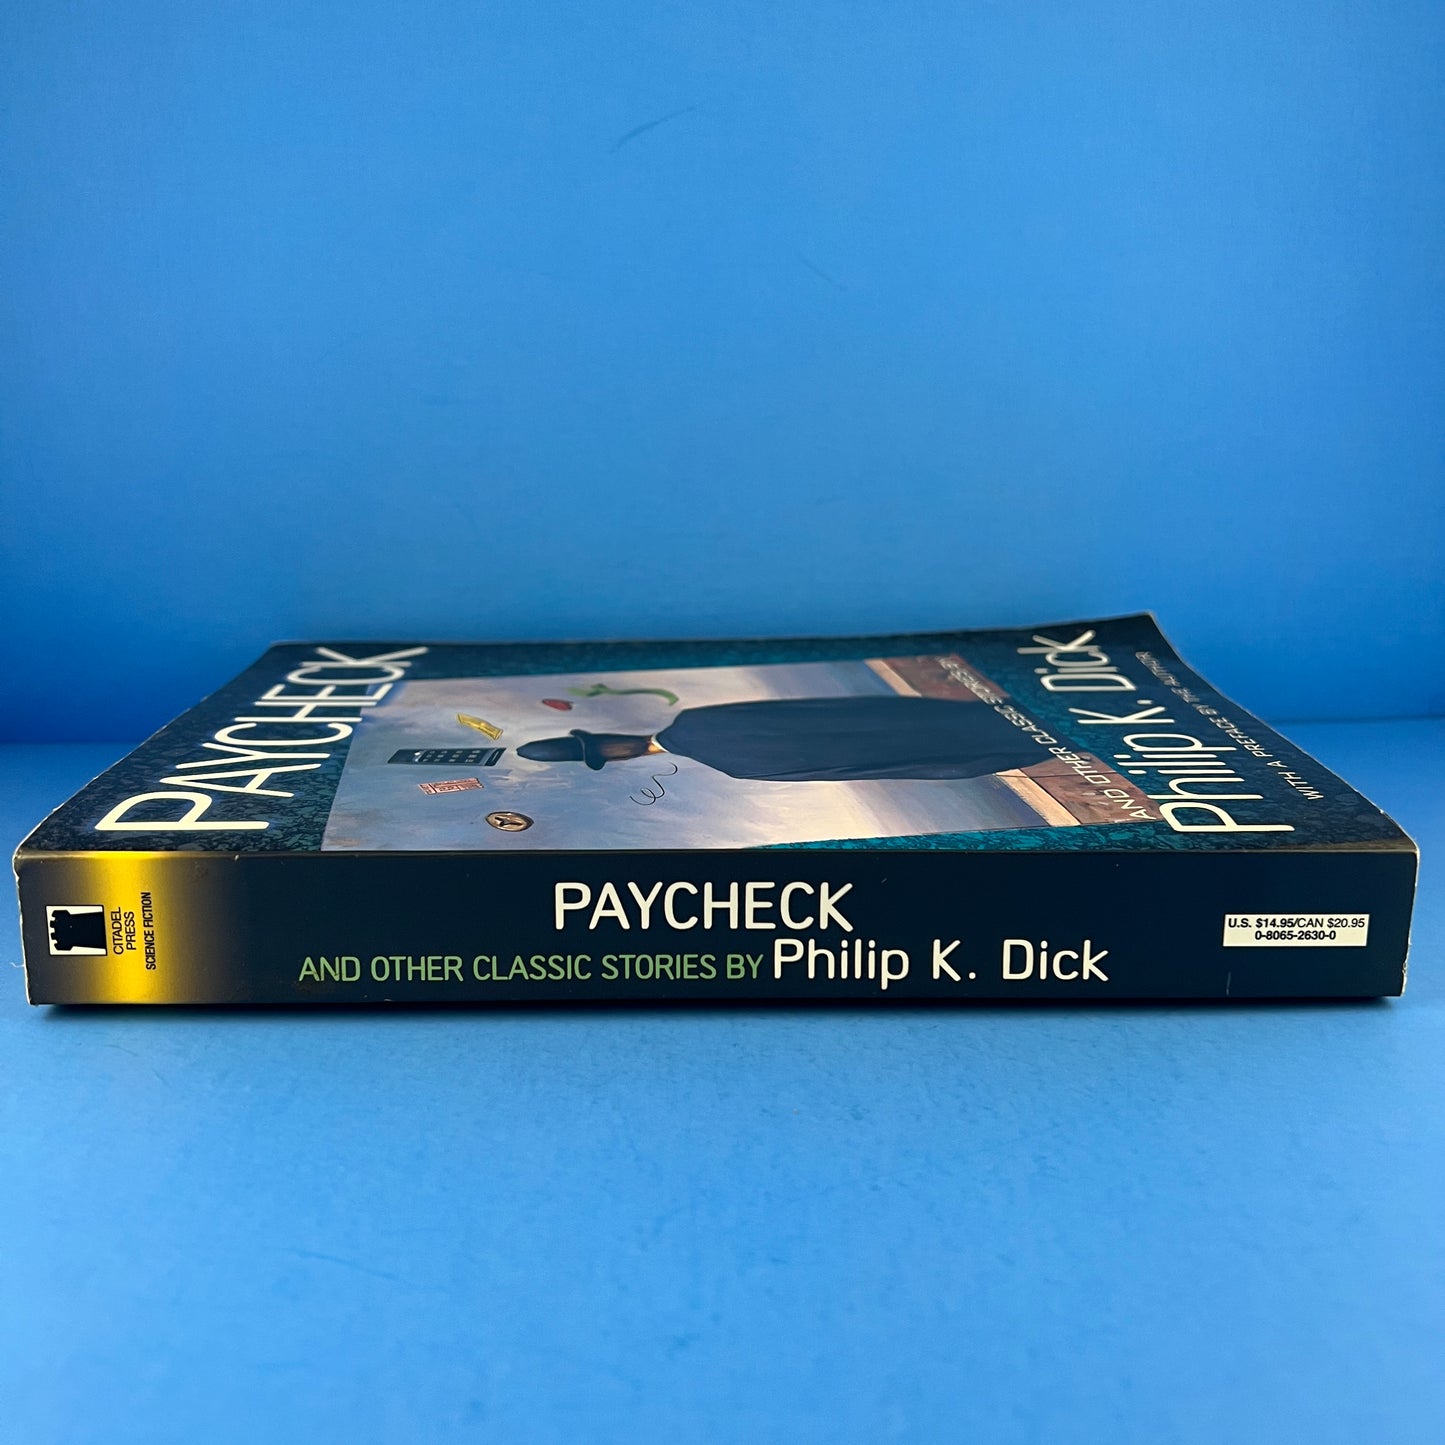 Paycheck and Other Classic Stories